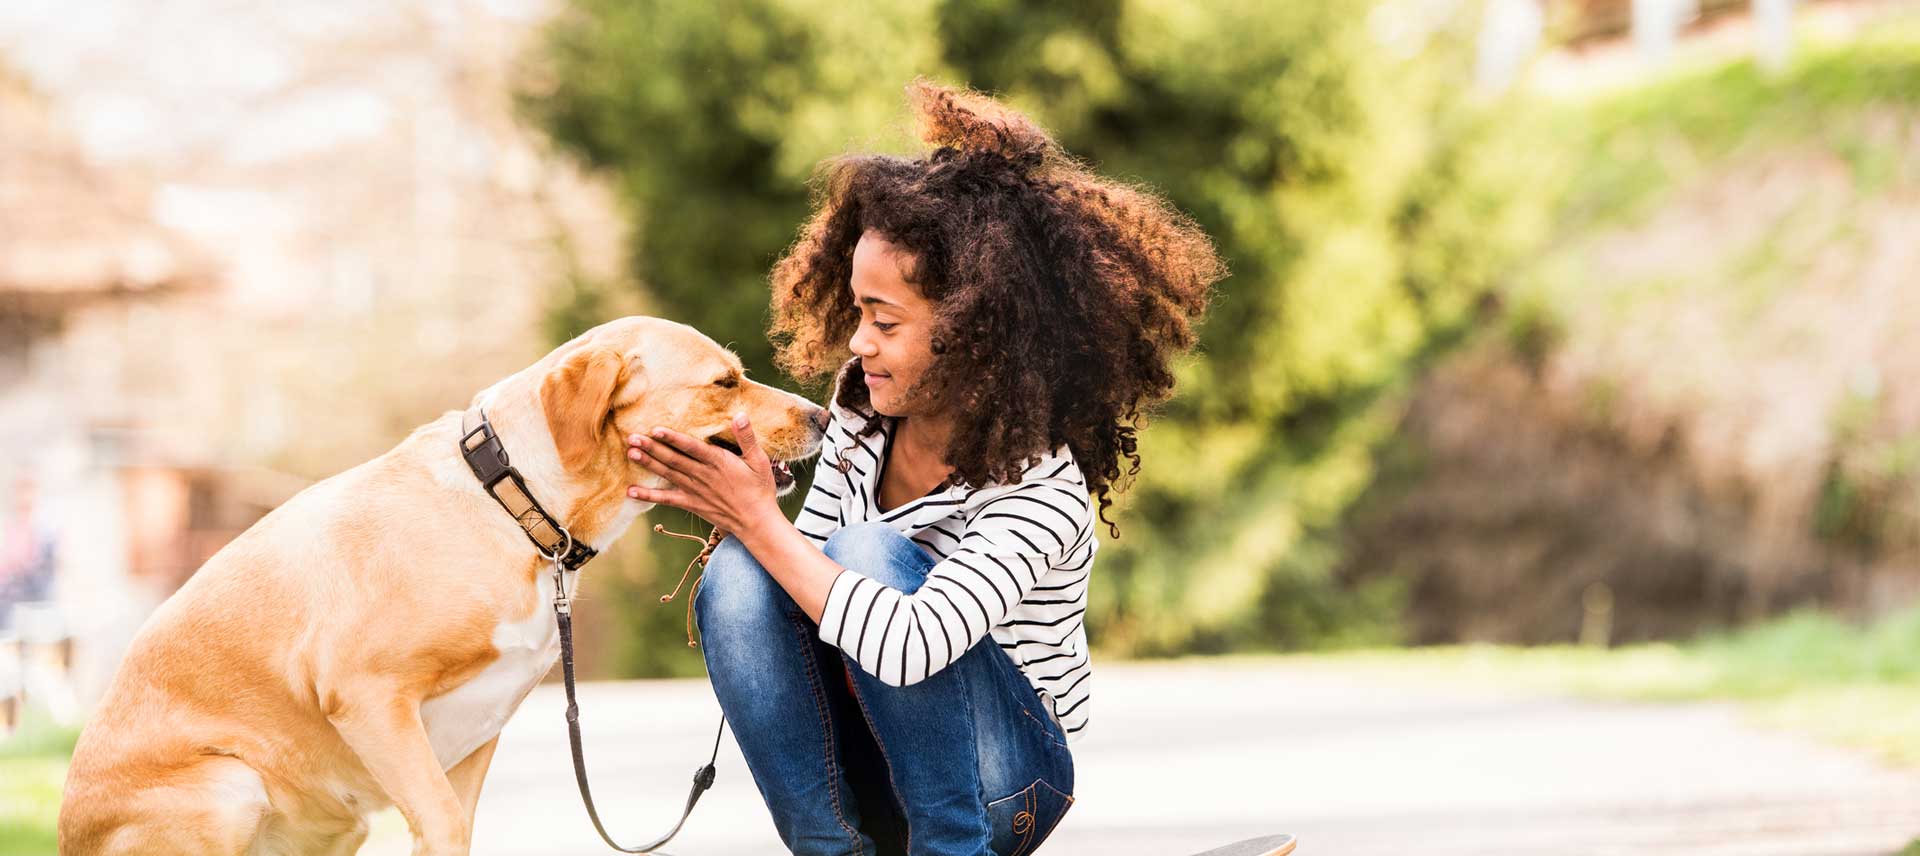 Girl with curly hair, caressing her pet dog on leash.